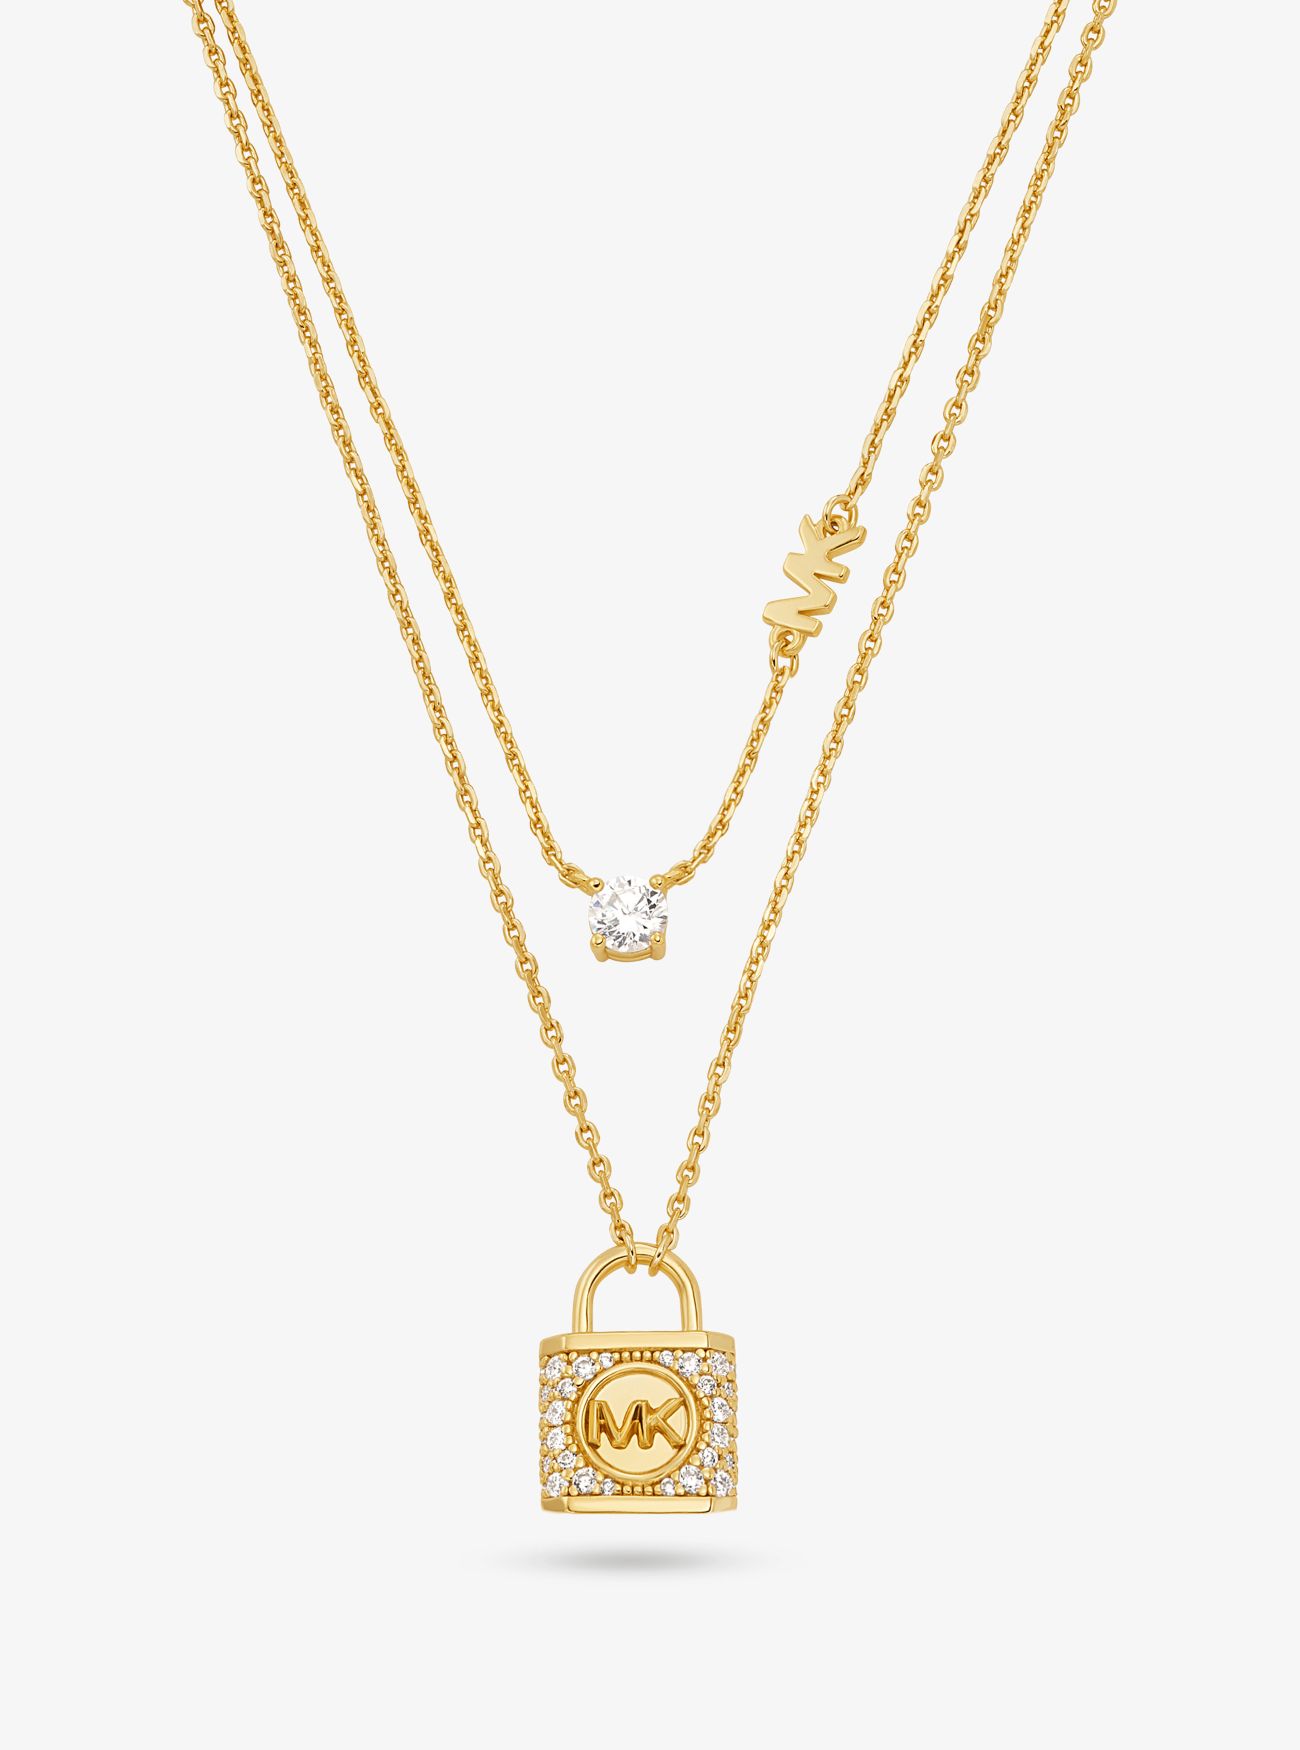 MK Precious Metal-Plated Sterling Silver PavÃ© Lock Layered Necklace - Gold - Michael Kors